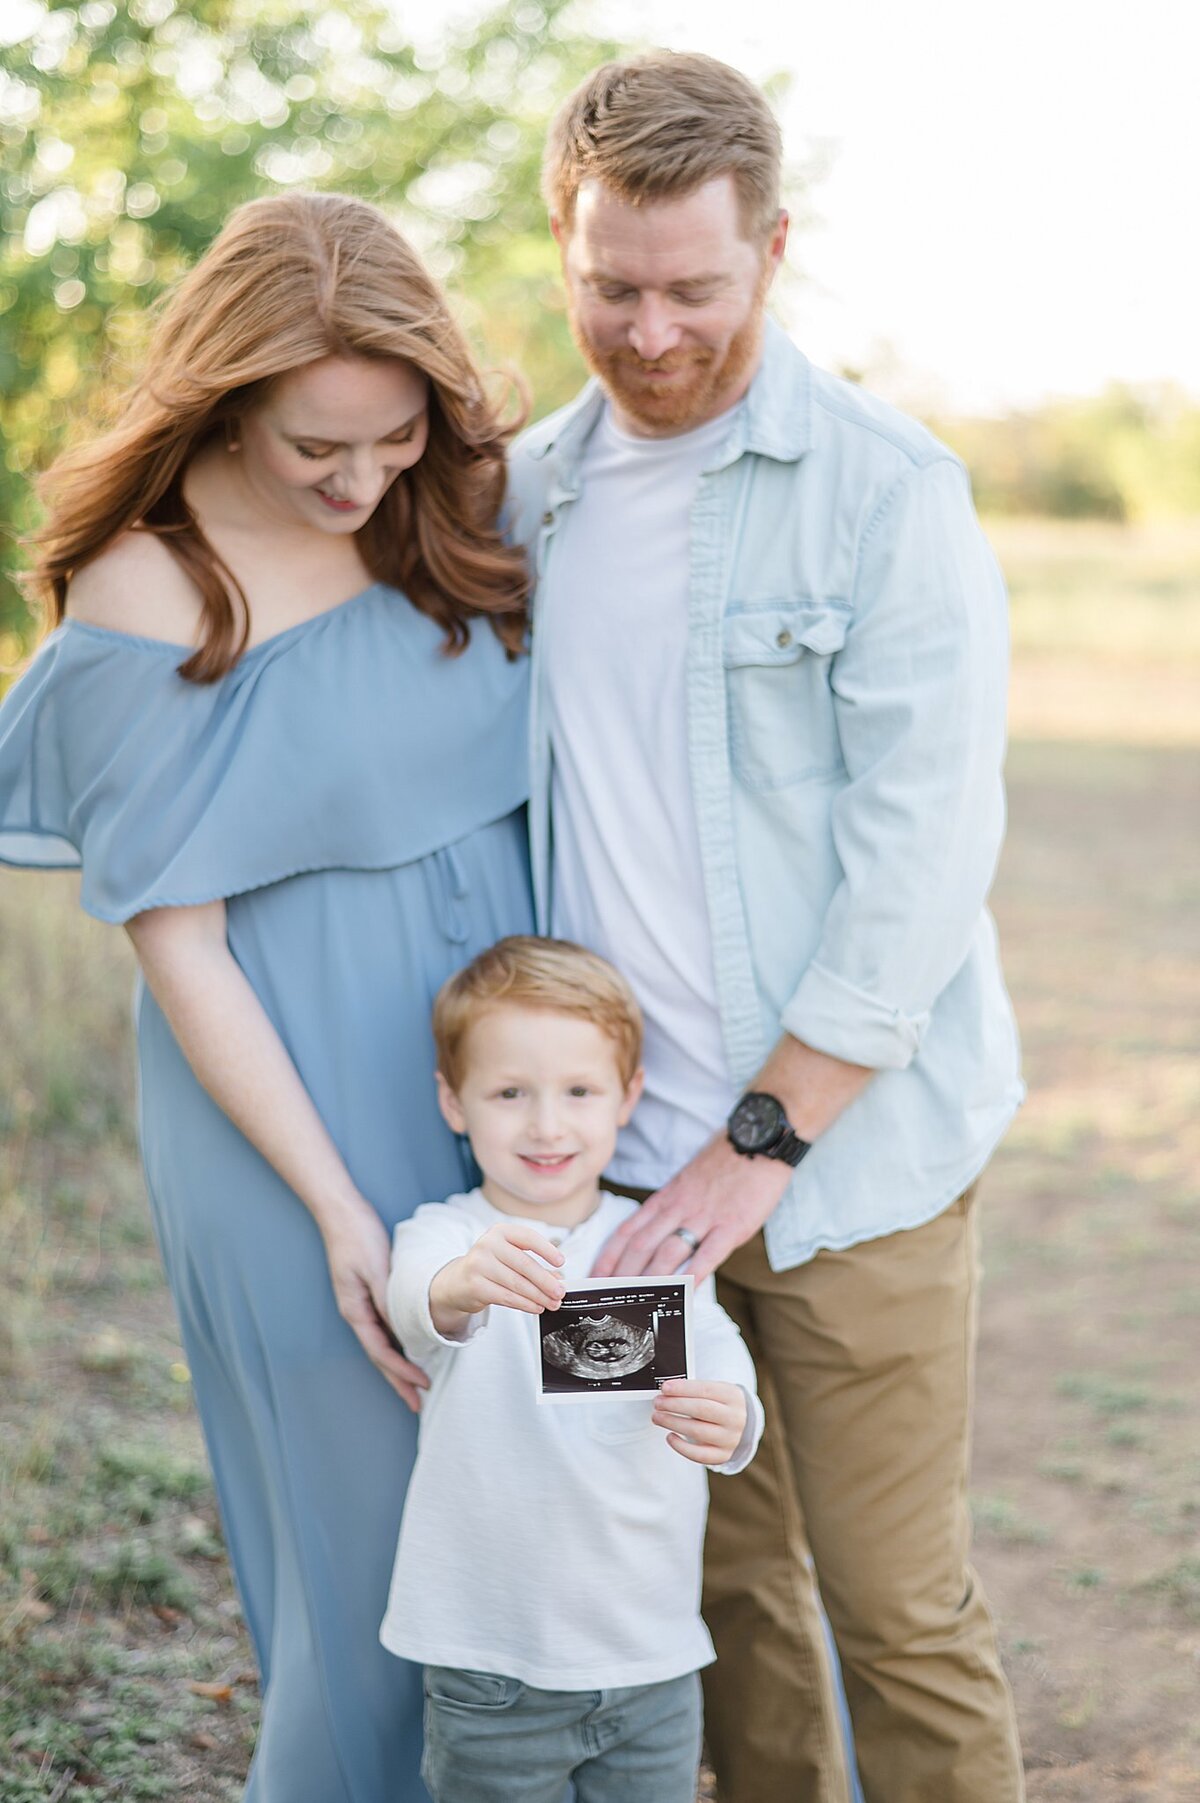 pregnancy announcement with big brother holding sonogram